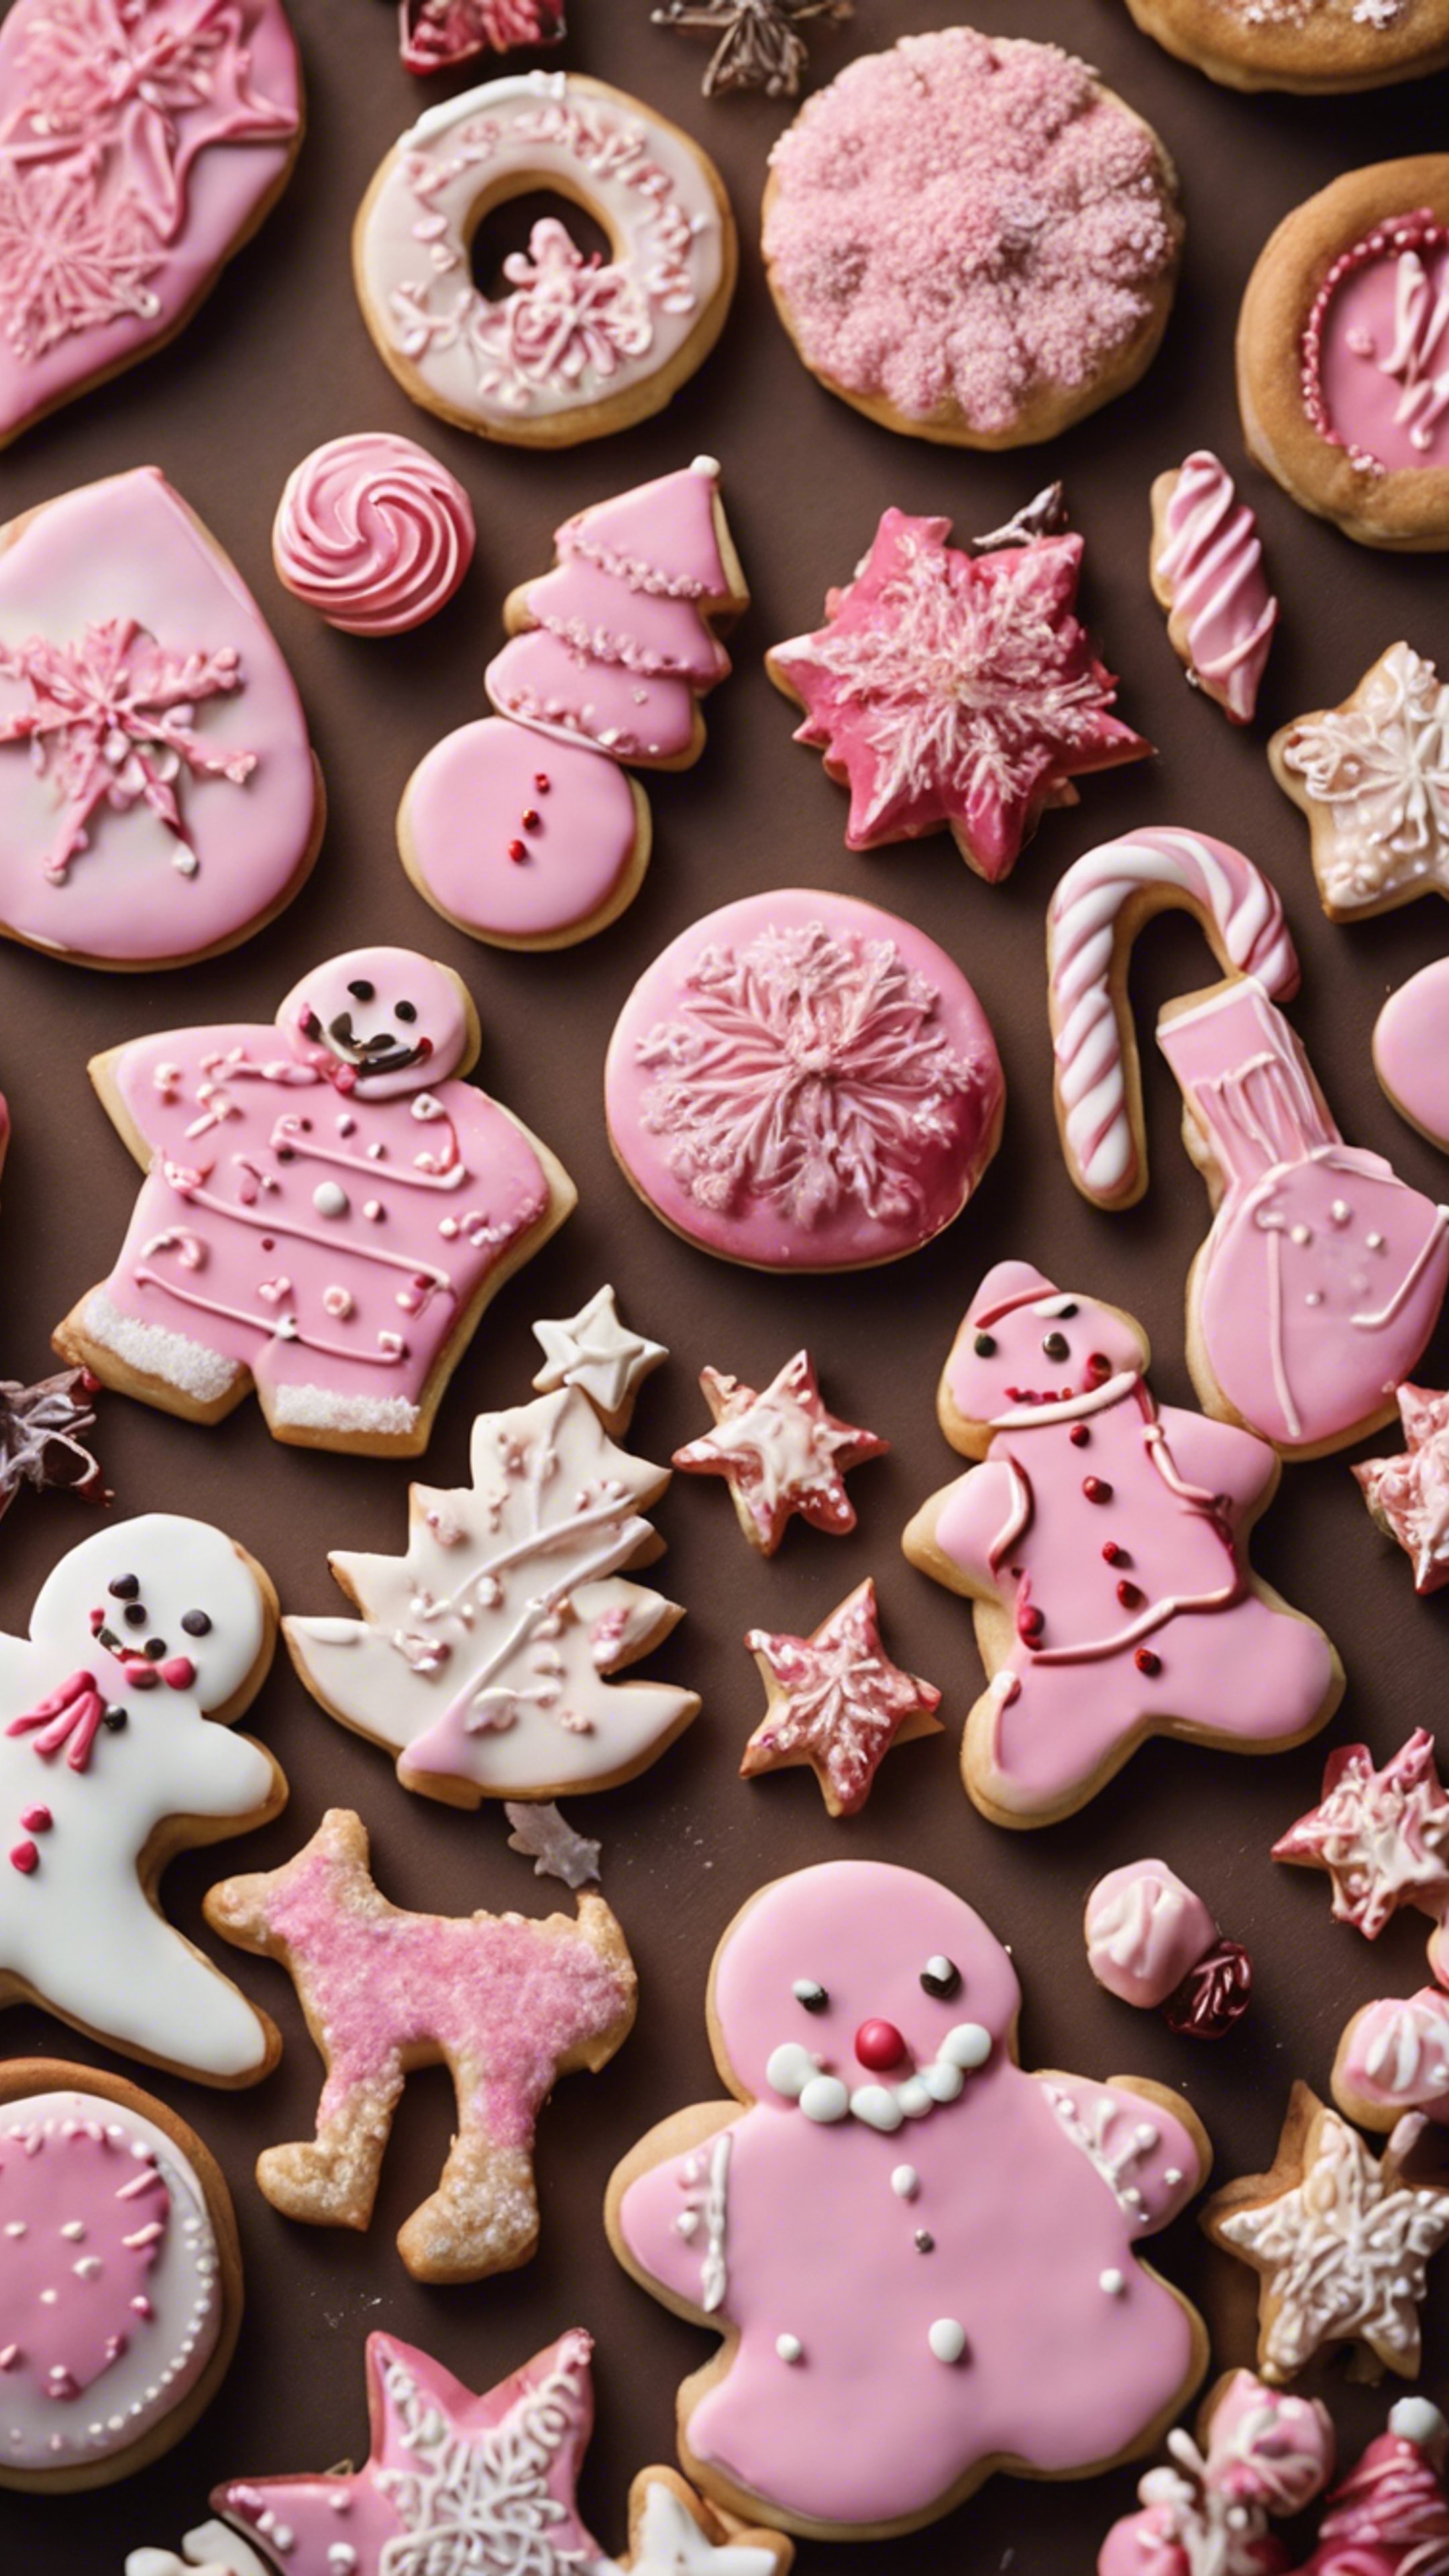 Various types of pink Christmas cookies and sweets laid on a table with festive decorations. کاغذ دیواری[bb72647e6a9944a5b5aa]